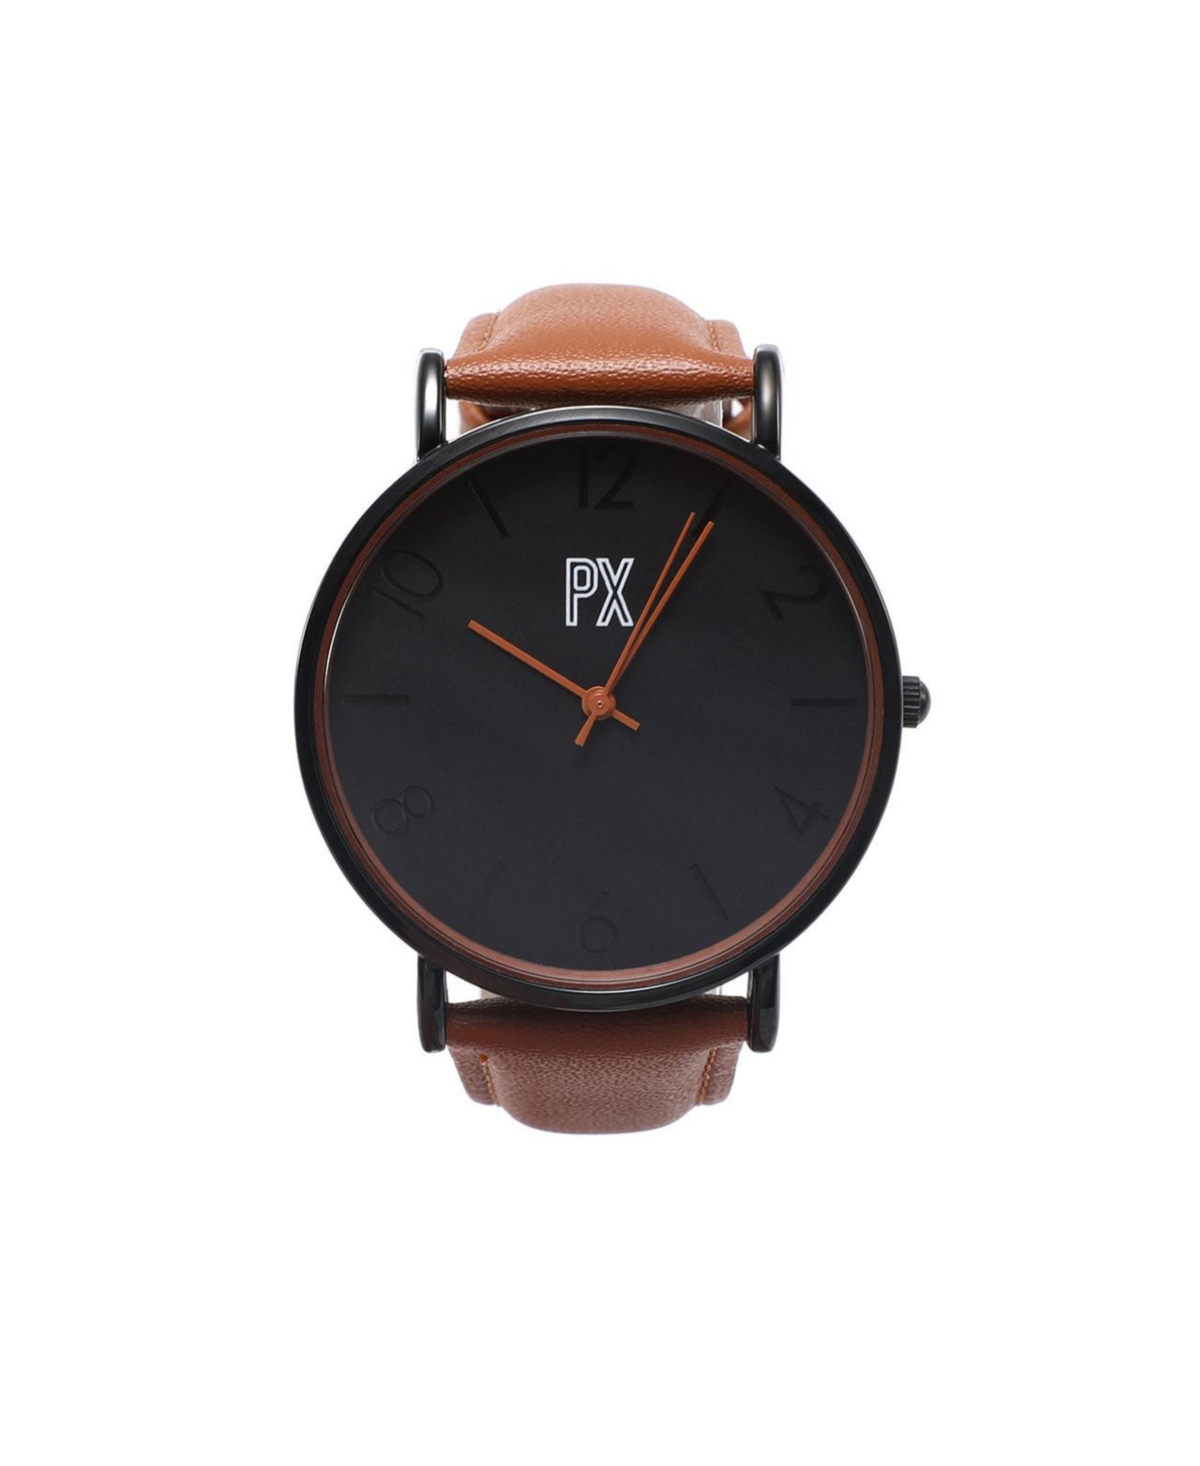 Keith Leather Strap Watch - Cognac